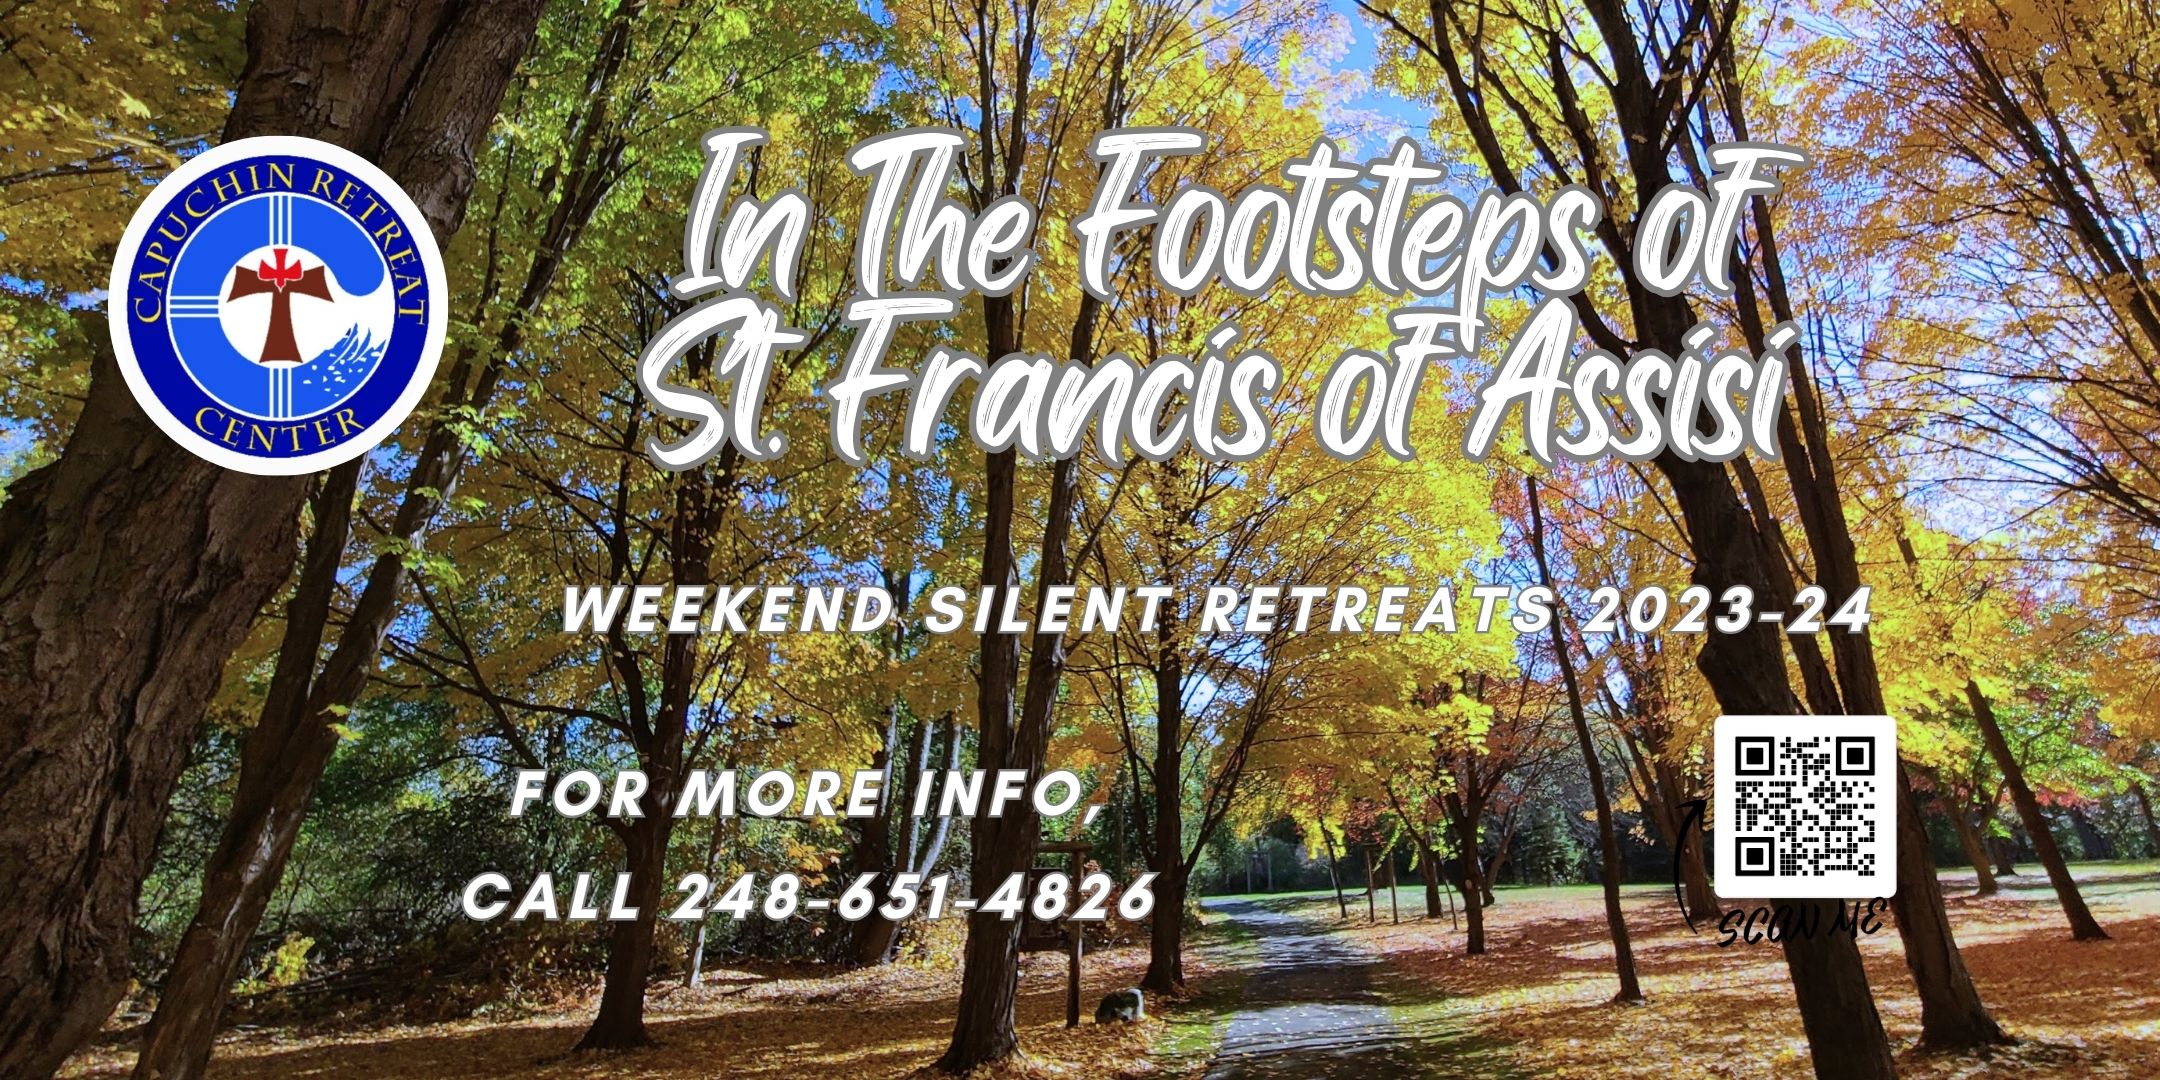 Women’s Retreat Weekend: In the Footsteps of St. Francis of Assisi